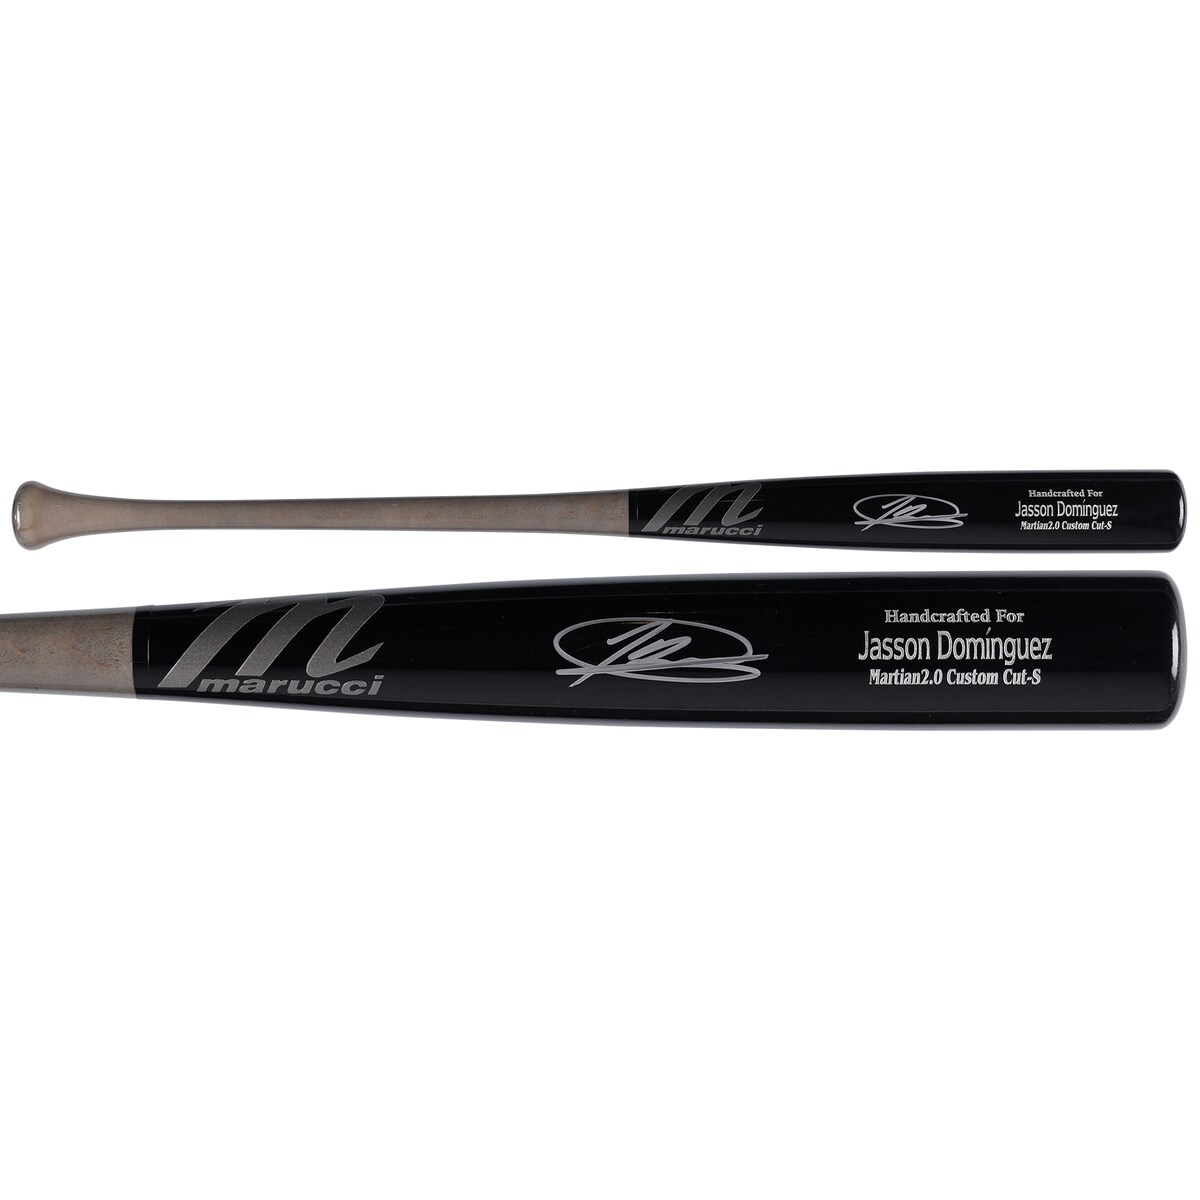 If Jasson Dominguez is one of your favorite players on the New York Yankees, then be sure to add this autographed Marucci Game Model Bat to your collection. Featuring a hand-signed signature from the youngest player in franchise history to hit a home run in his major league debut, it's the perfect way to showcase your support for Jasson Dominguez for years to come.Made in the USASignature may varyObtained under the auspices of the Major League Baseball Authentication Program and can be verified by its numbered hologram at MLB.comBrand: Fanatics AuthenticOfficially licensed